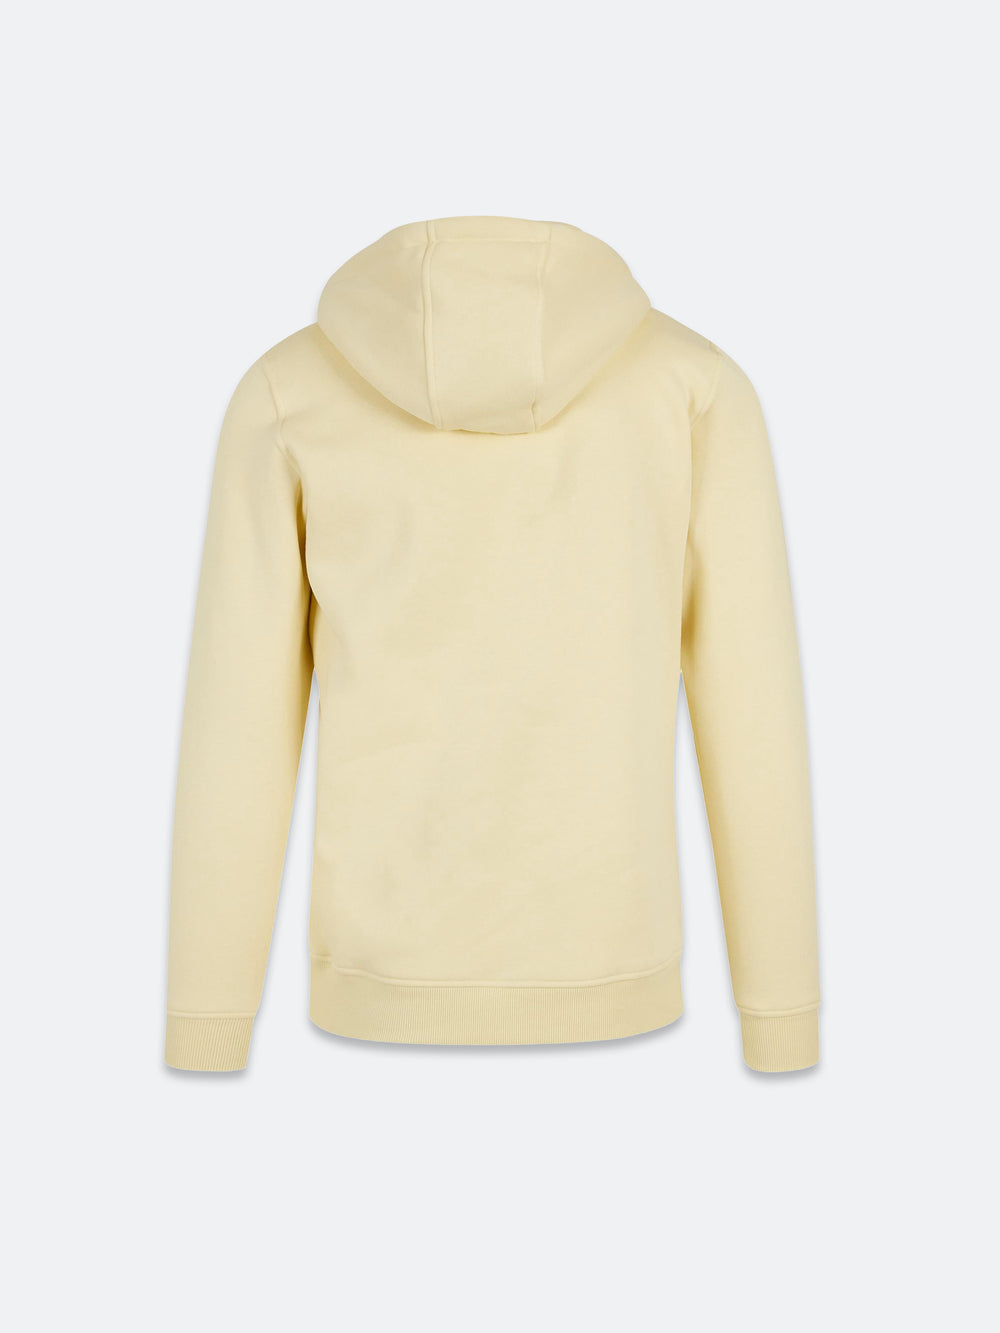 Boxed Hoodie (Soft Yellow)